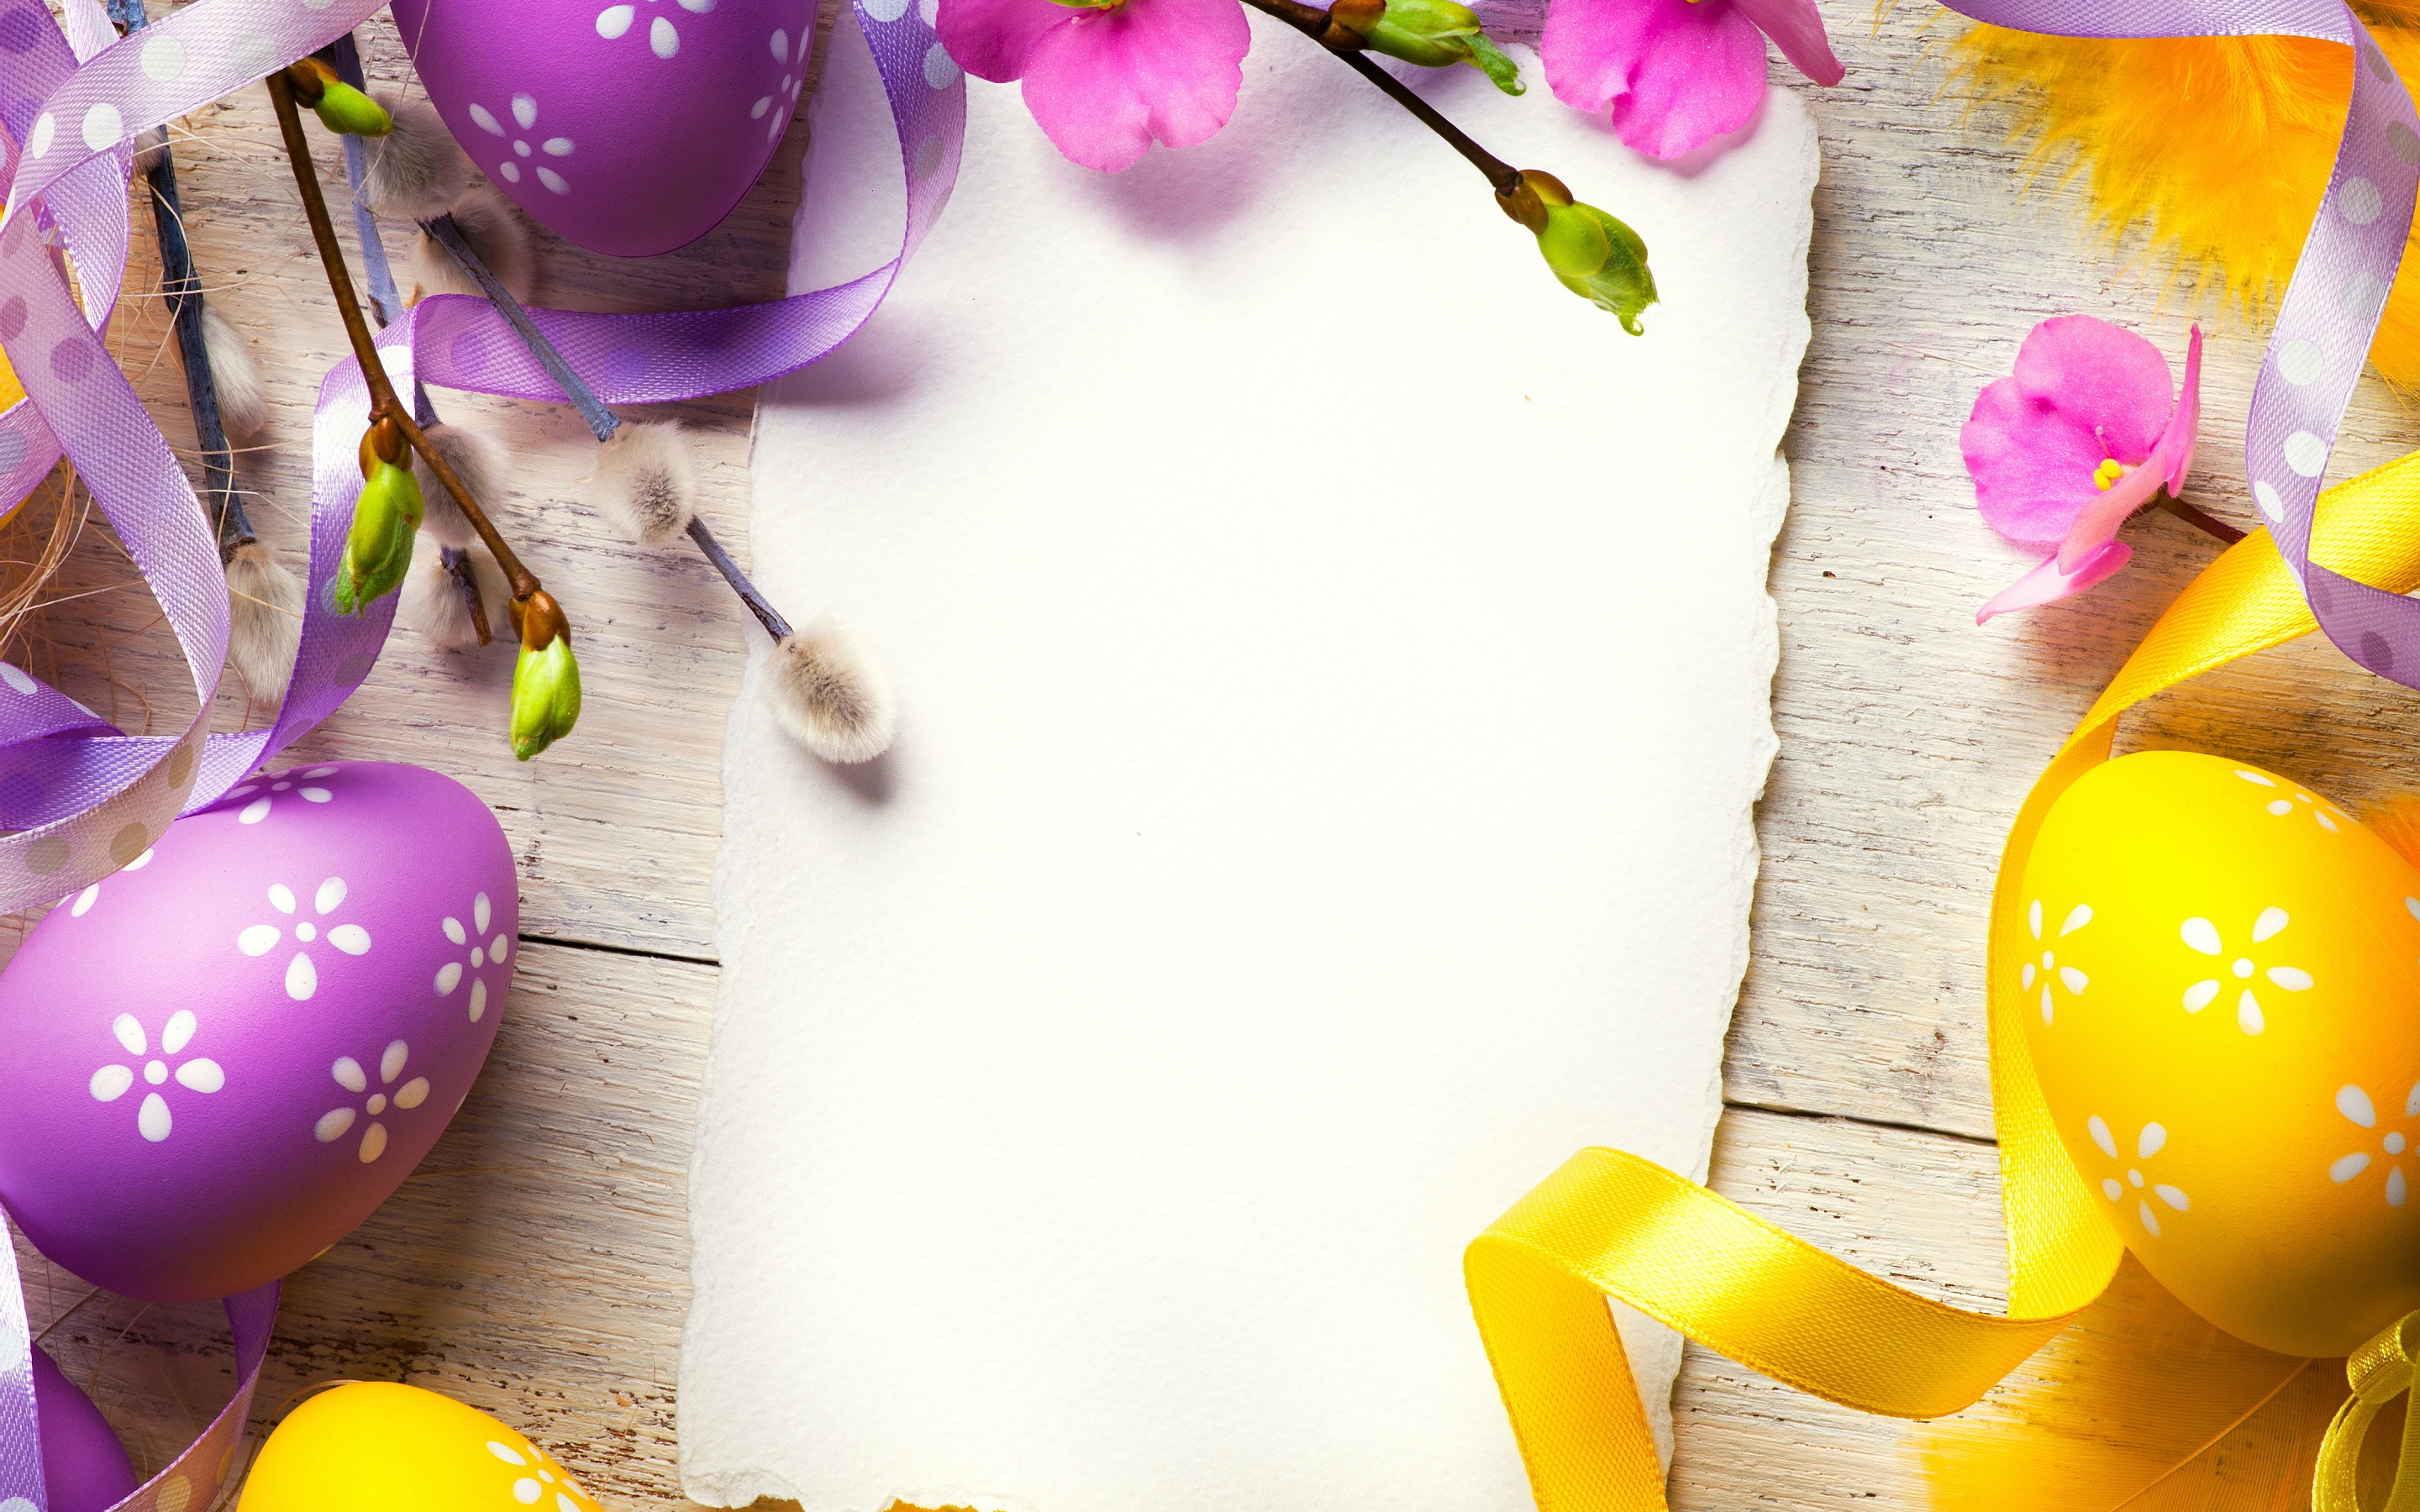 Easter Background HD Image